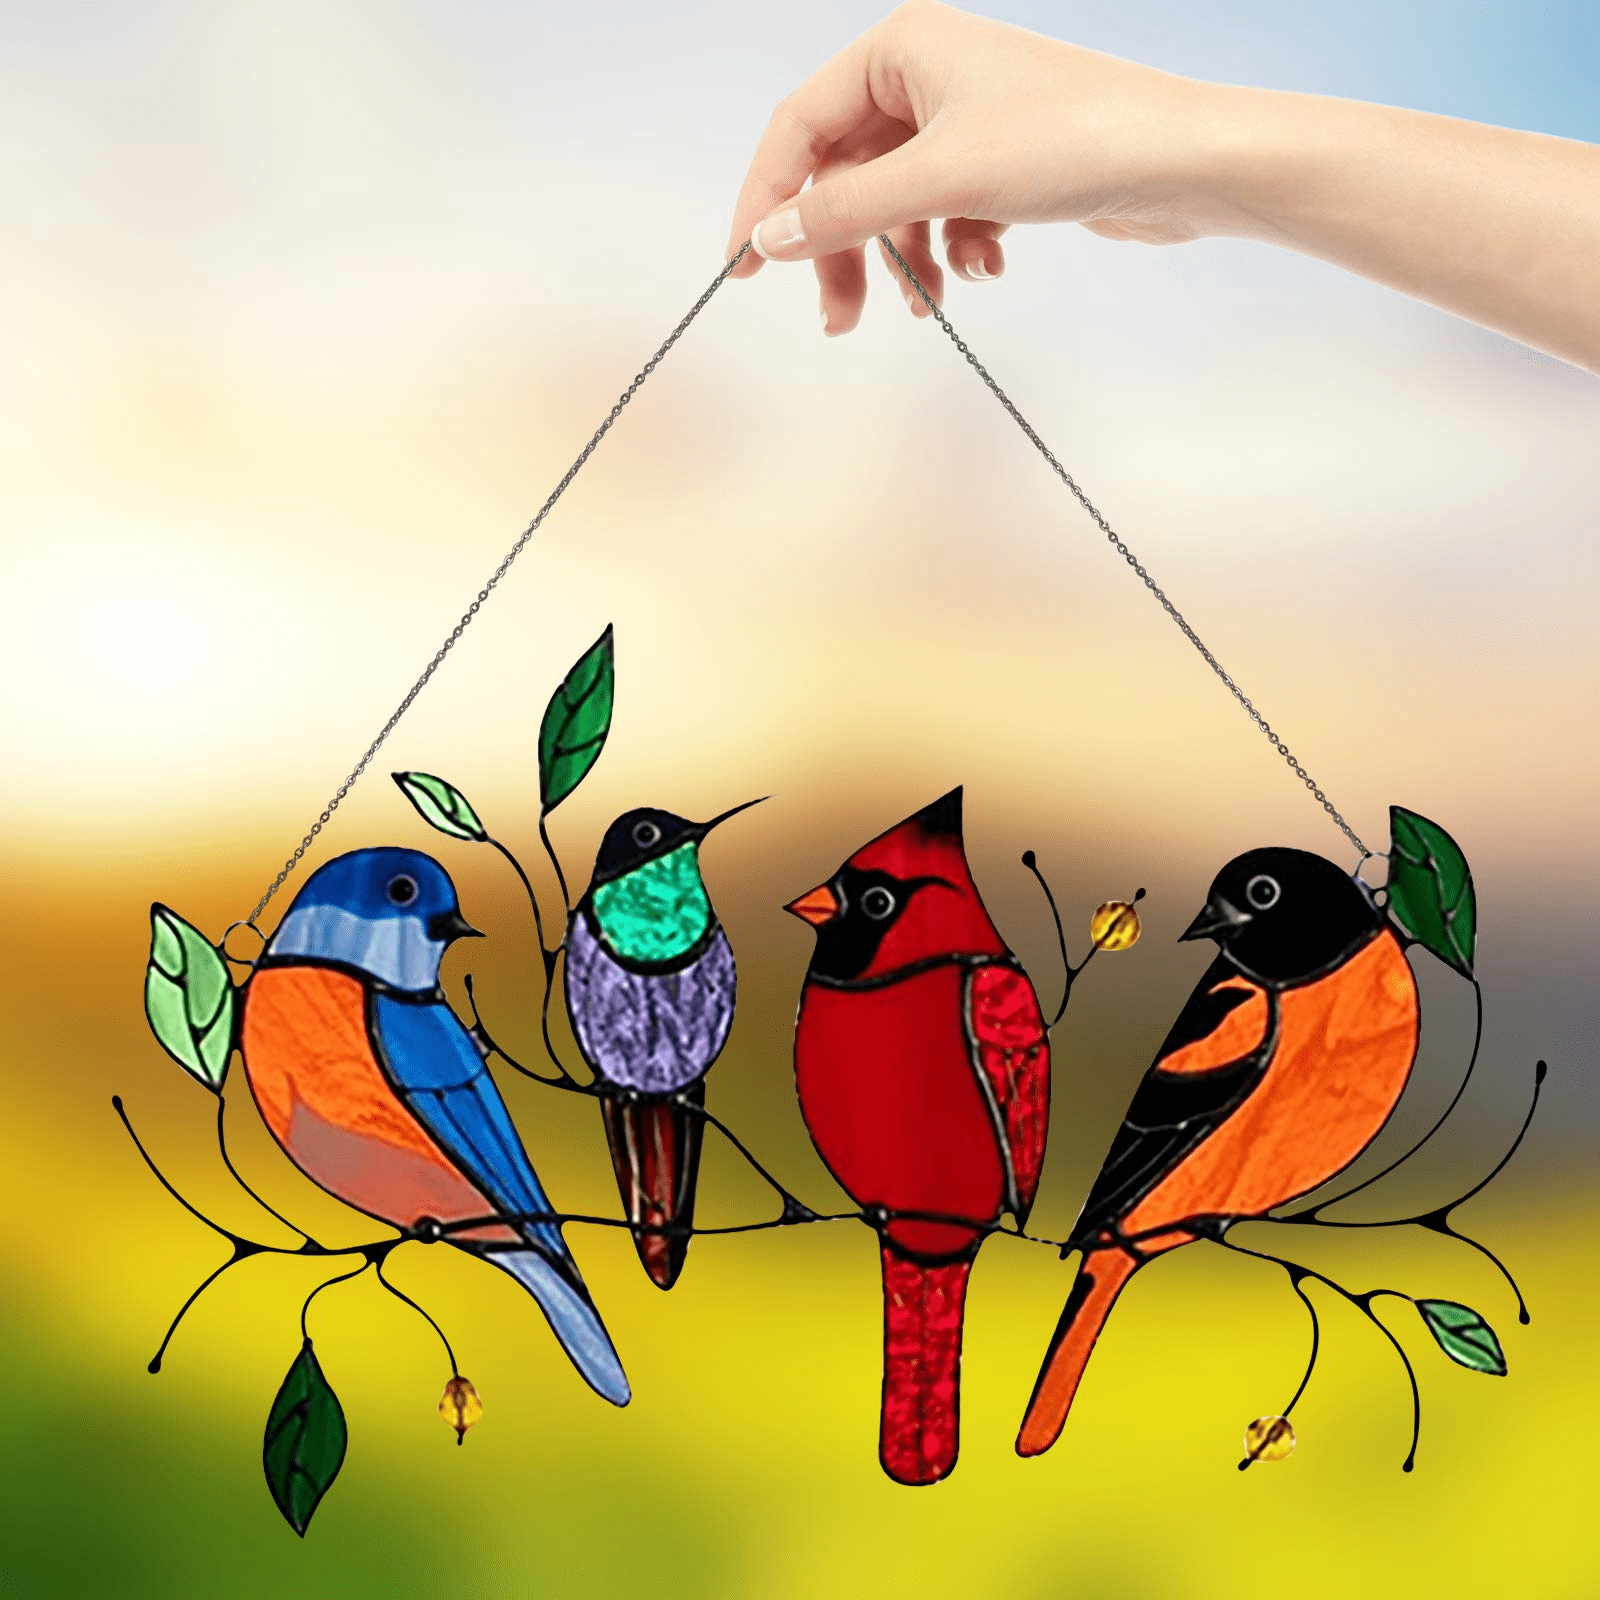 4/7 Birds On A Wire Sun Catcher Stained Glass Window Panel Hanging Ornament Gift 